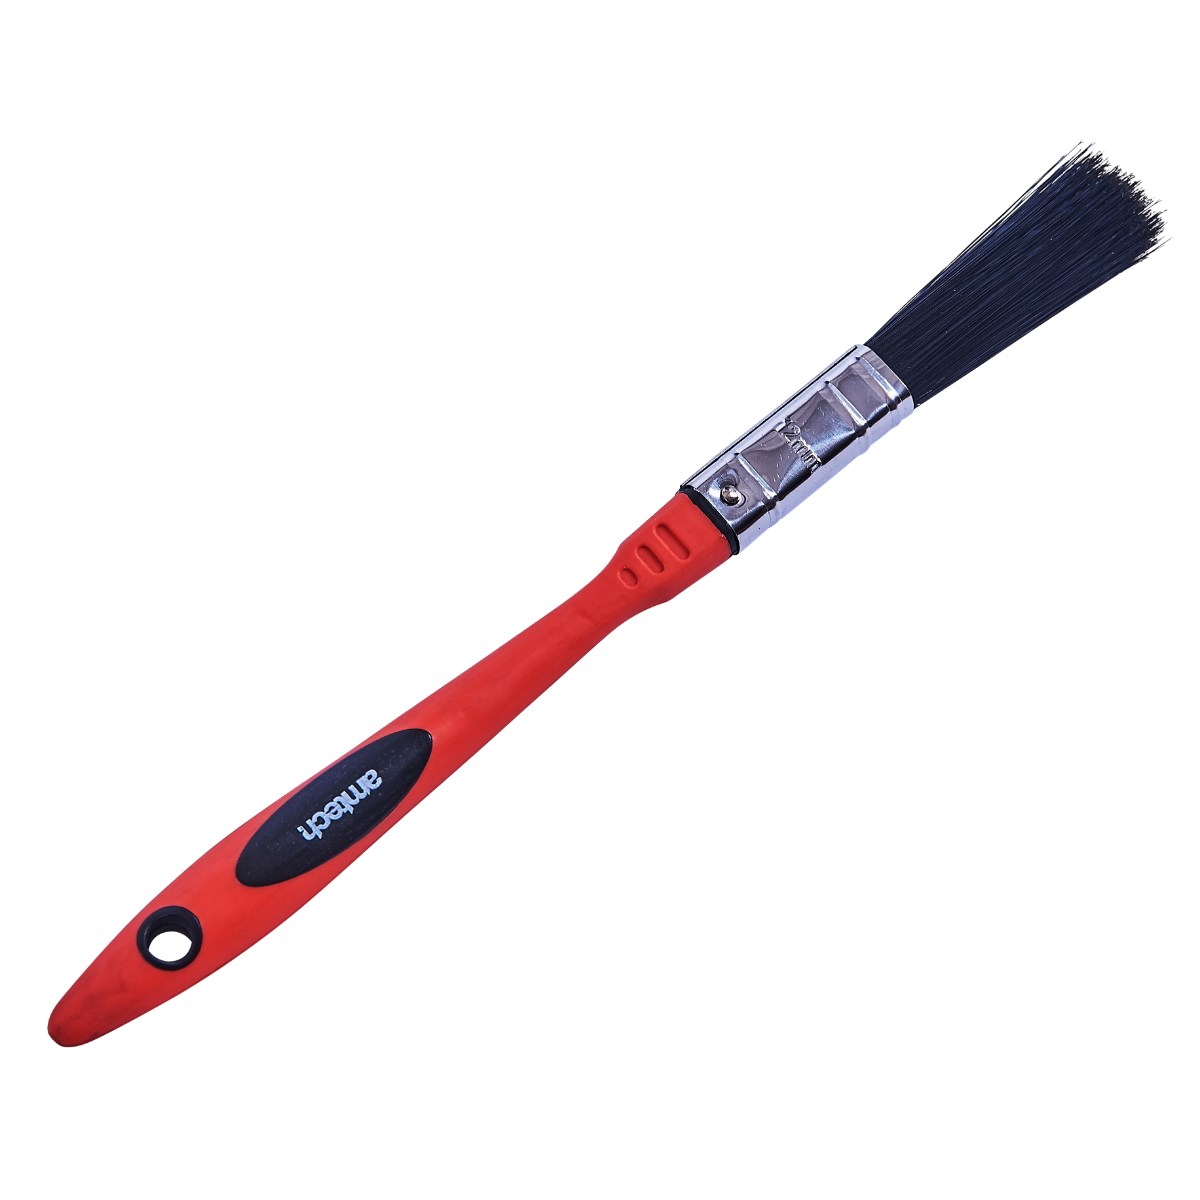 Classic Handle Painting By Am-Tech 0.5" 12mm No Bristle Loss Paint Brush 